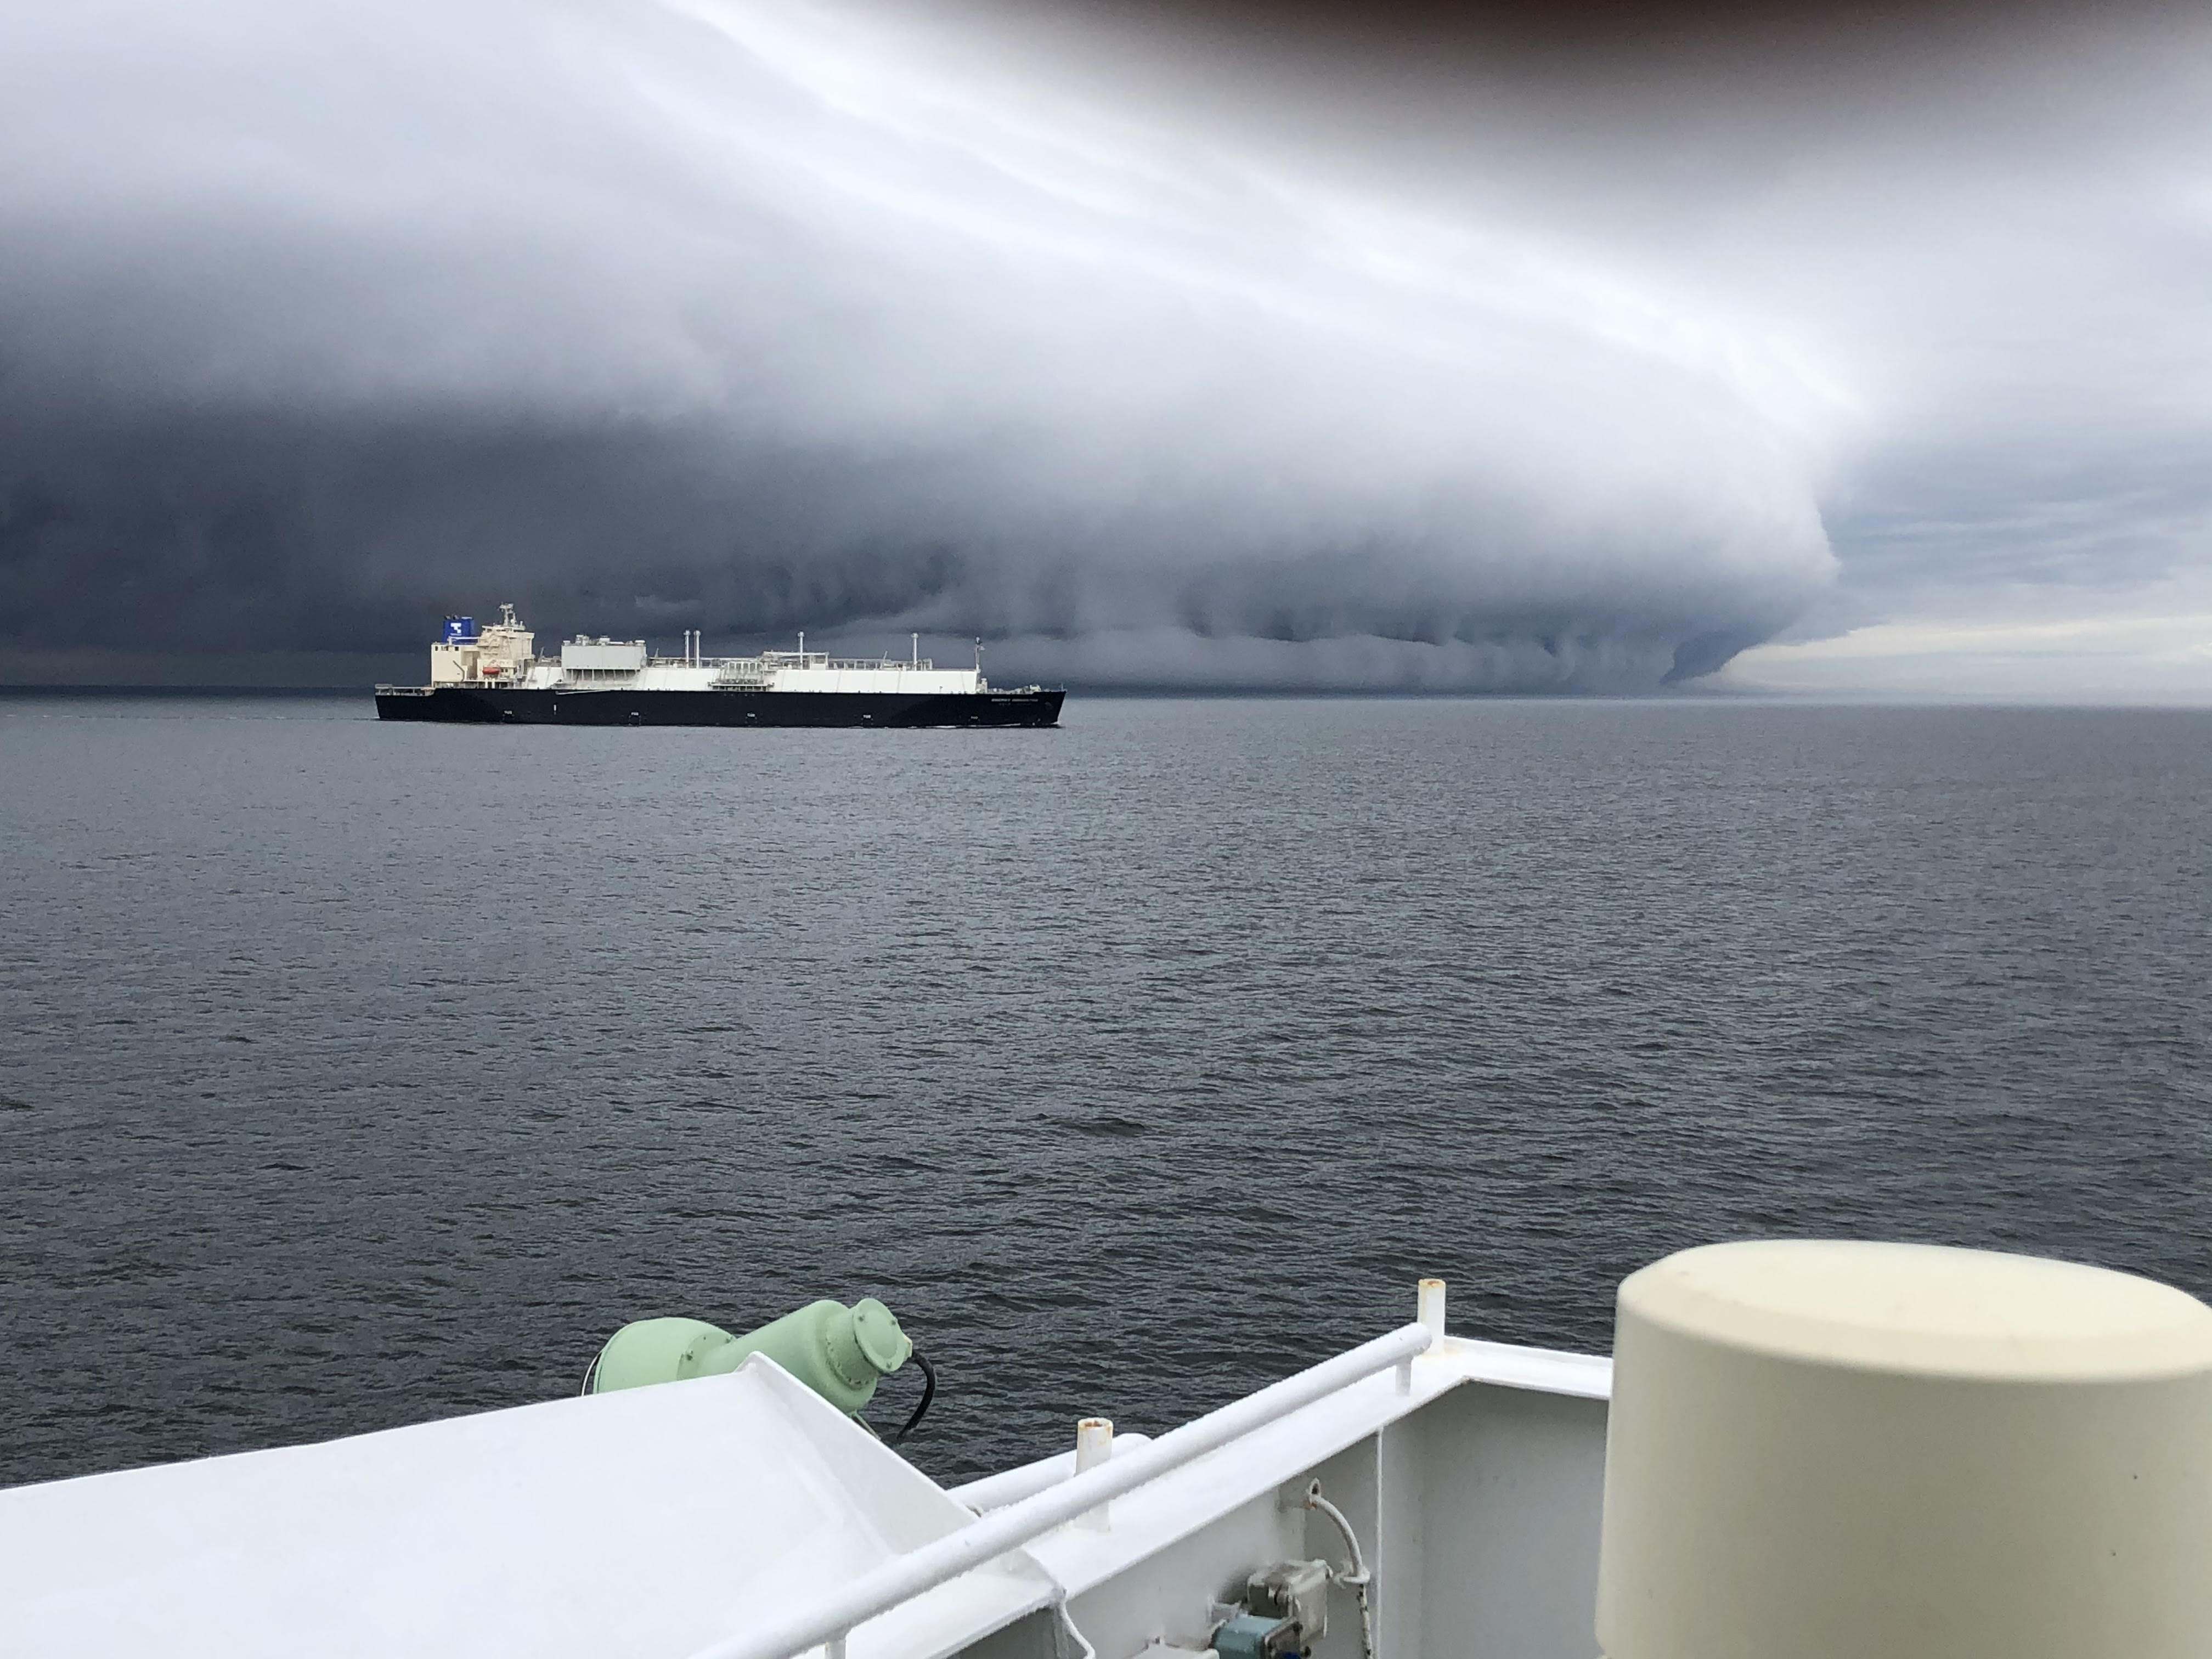 Ship in an Approaching Storm. Photo Courtesy of Captain Allison Schulte.